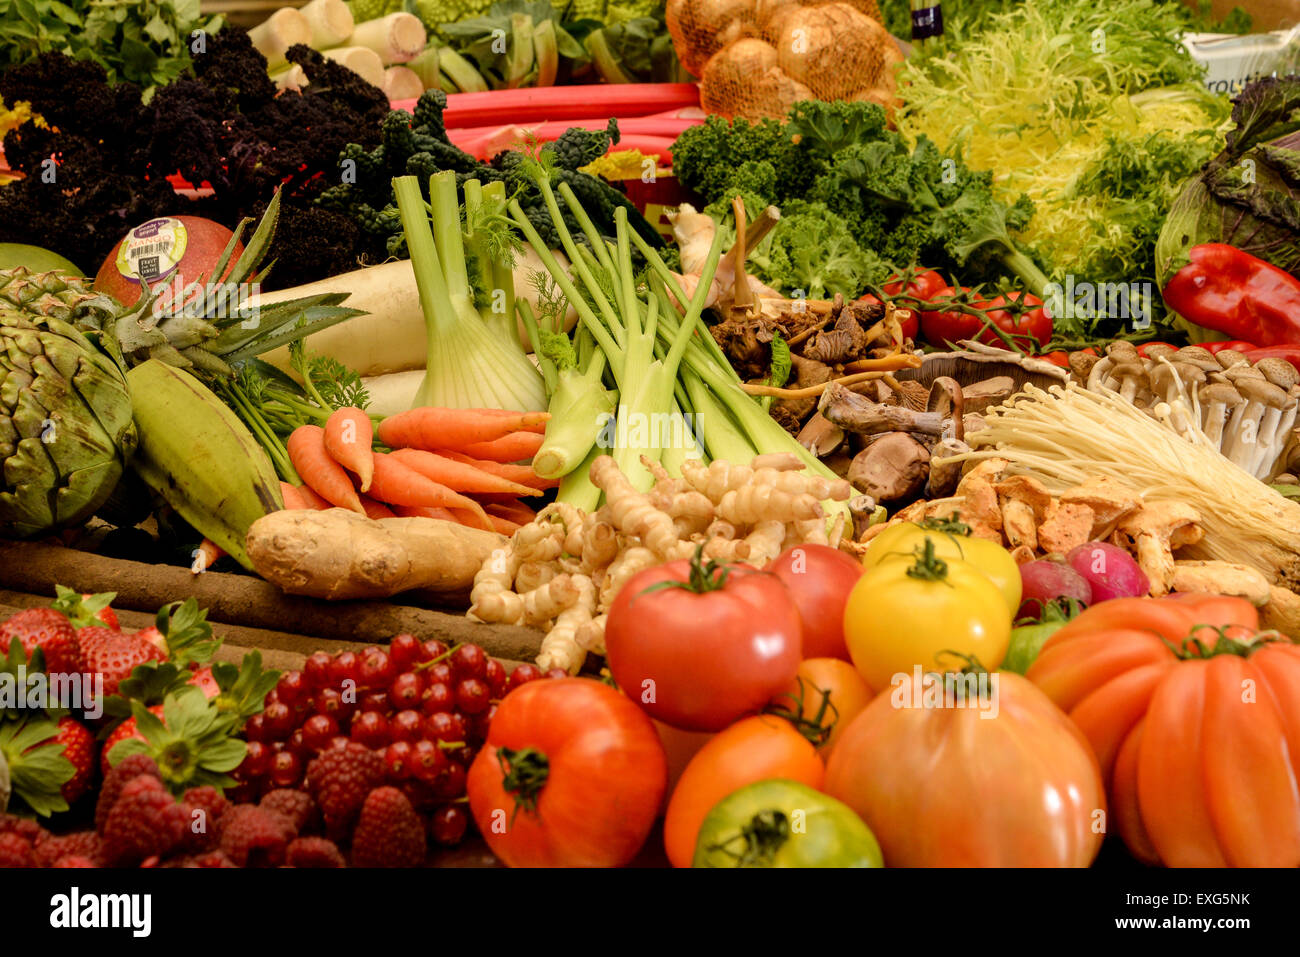 Vegetable display Carrot, carrots, parsnips  tomatoes, tomato’s, red , healthful eating, healthy eatingbrown, fruit, green, hei Stock Photo